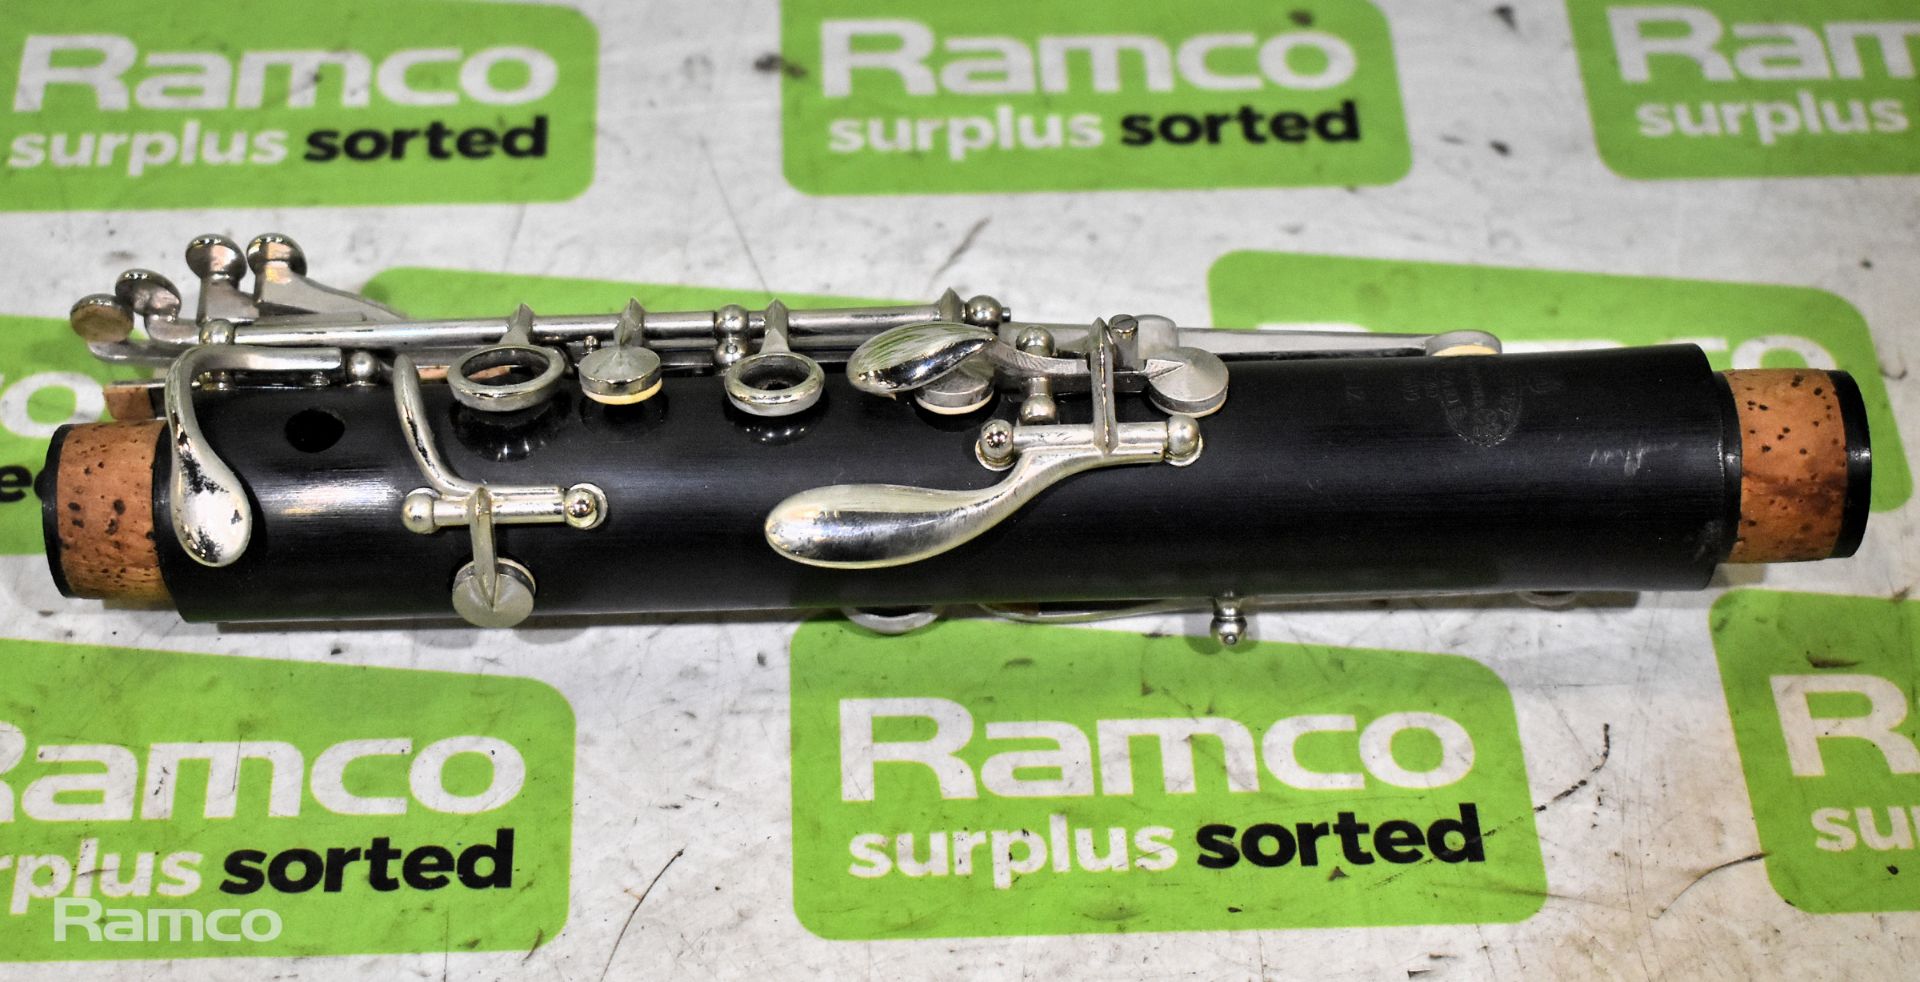 Buffet Crampon B12 clarinet - serial No 516793 - with case - Image 5 of 13